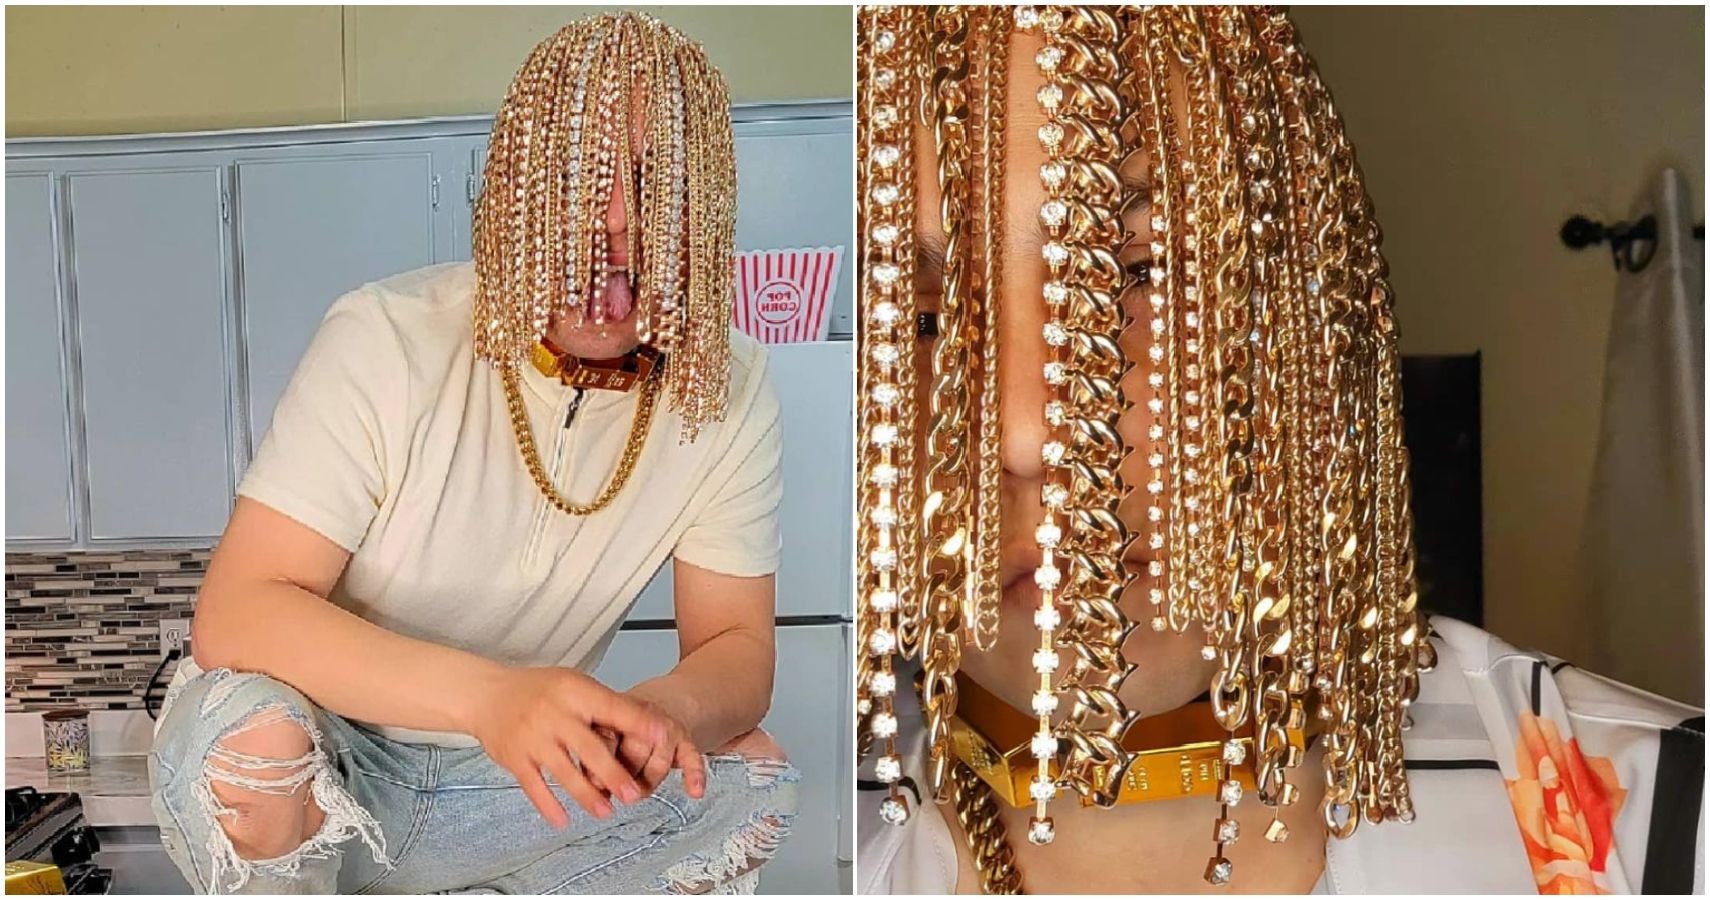 Gold Rush: Rapper Dan Sur Replaces Hair With Surgically Implanted Gold Chains